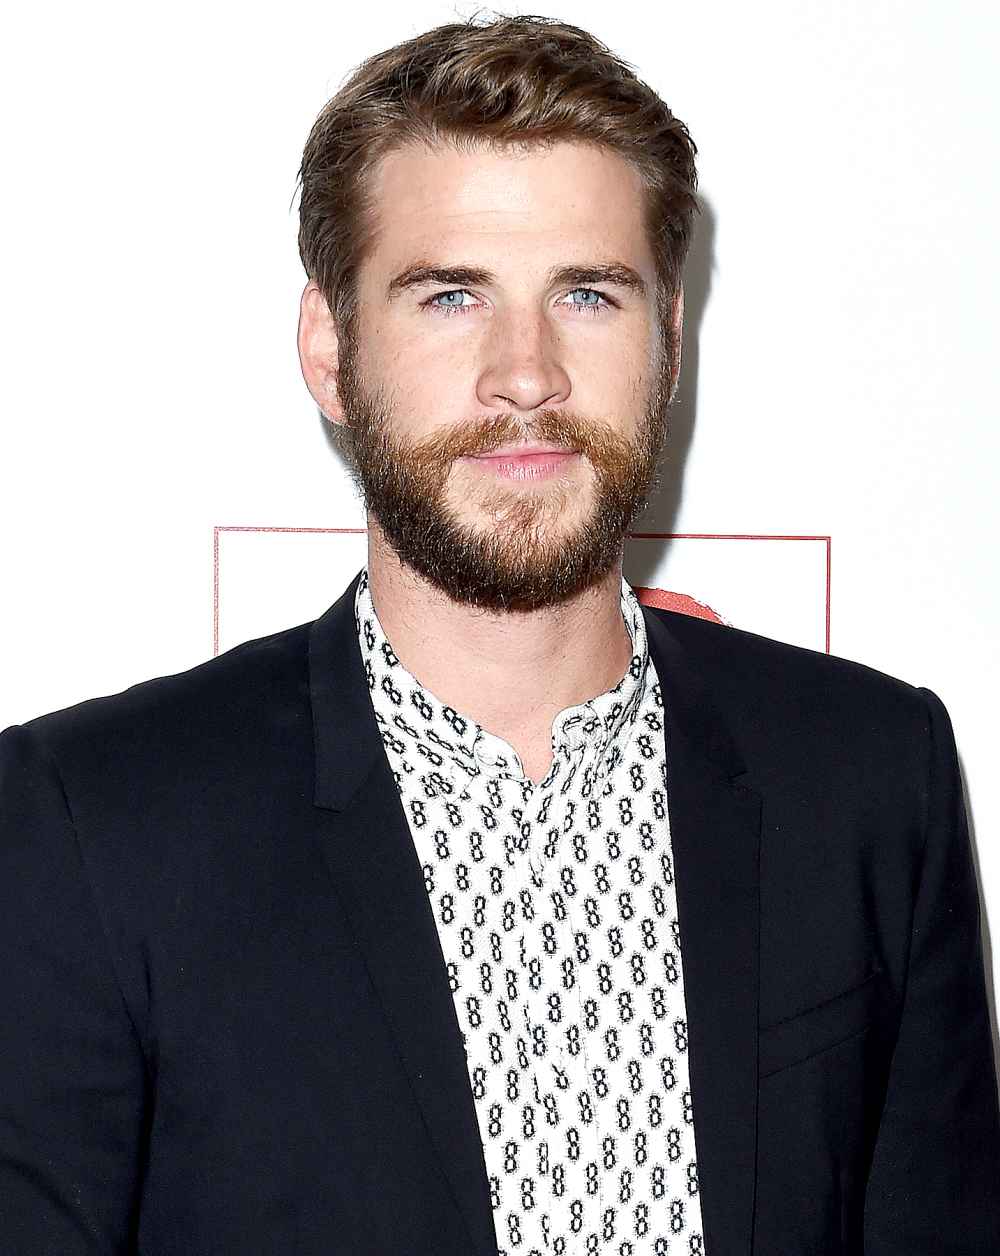 Liam Hemsworth arrives at the 10th Annual GO Campaign Gala at Manuela on November 5, 2016 in Los Angeles, California.